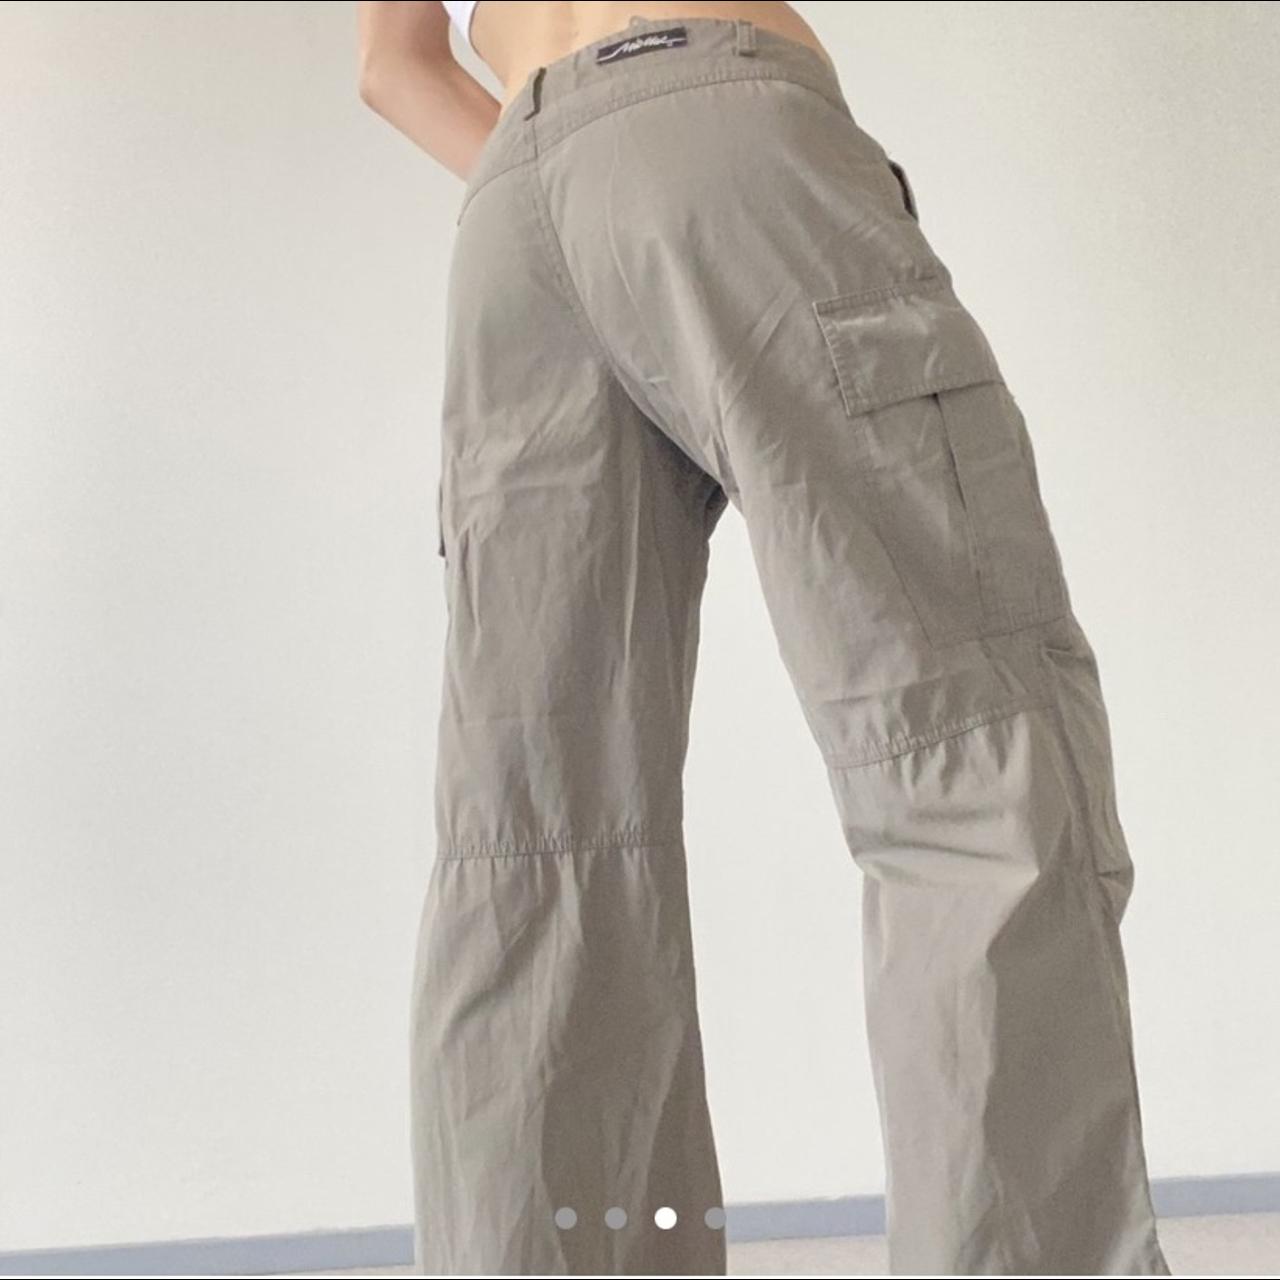 Repop! Sadly doesn't fit me Micmac trousers - Depop